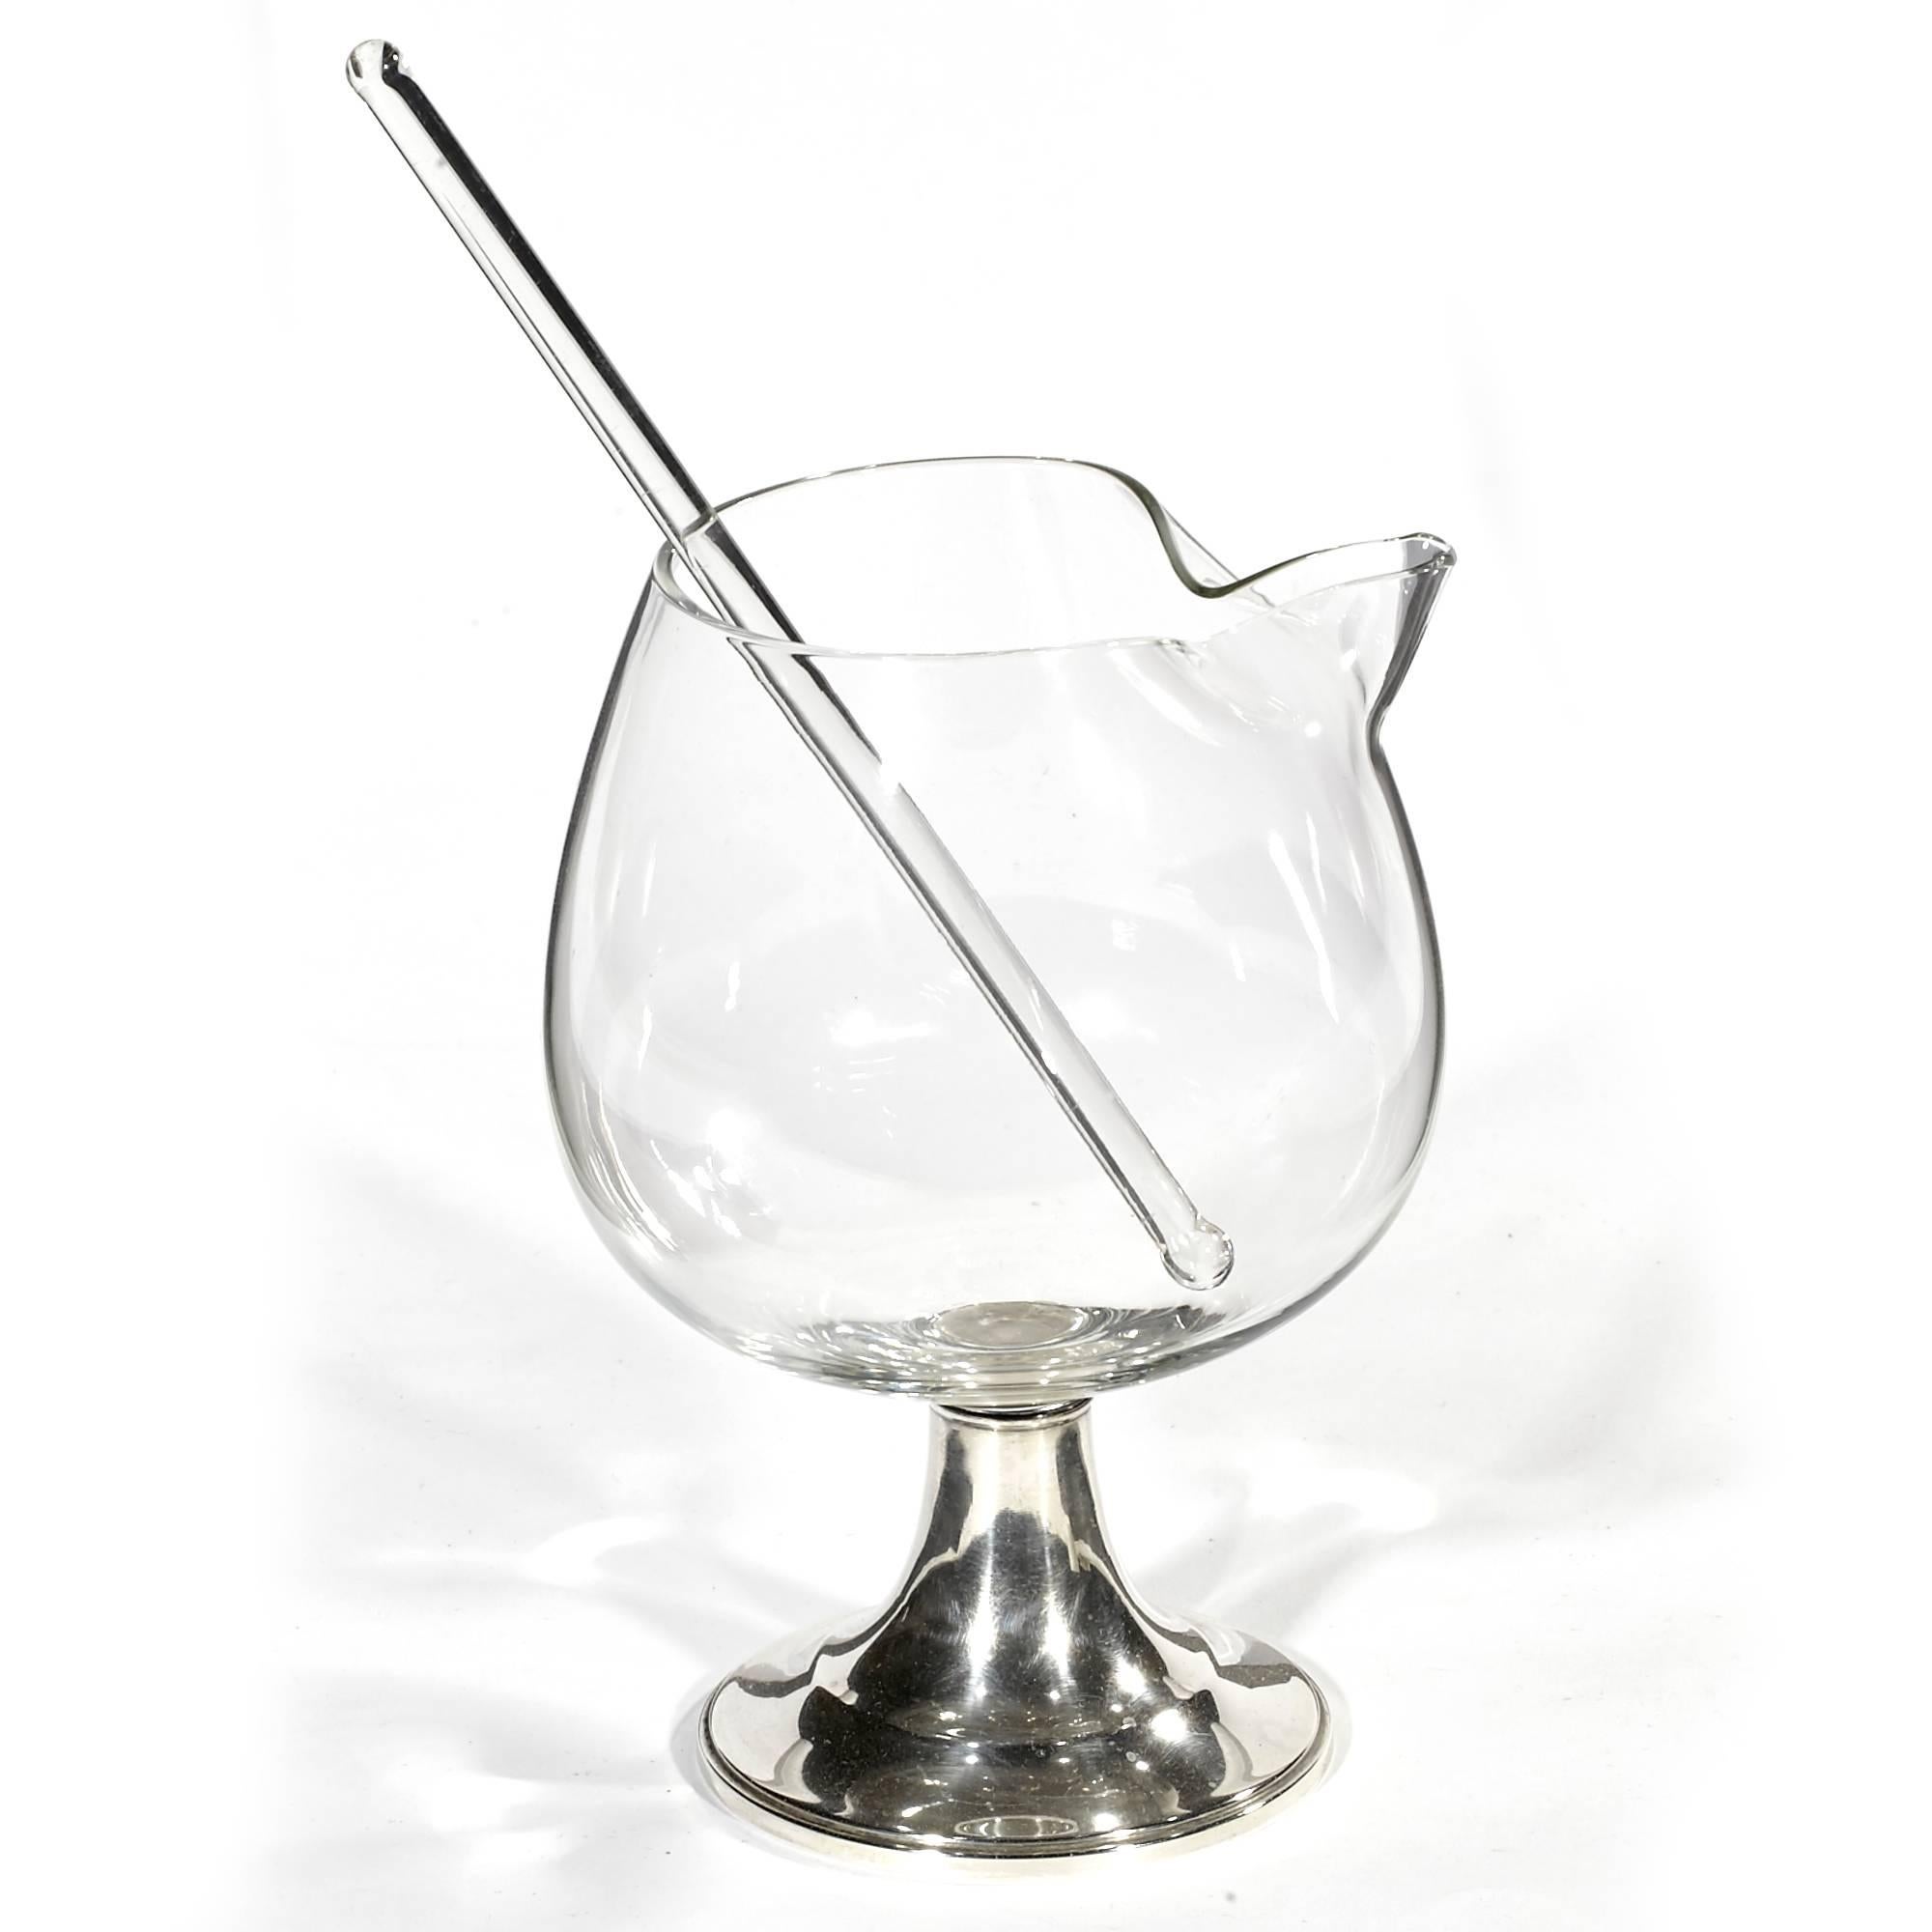 Vintage mid-20th century modern glass bar mixer with a weighted Sterling silver base. Mixer includes glass stirrer. Marked Alvin Sterling. Stirrer is 8in.L.